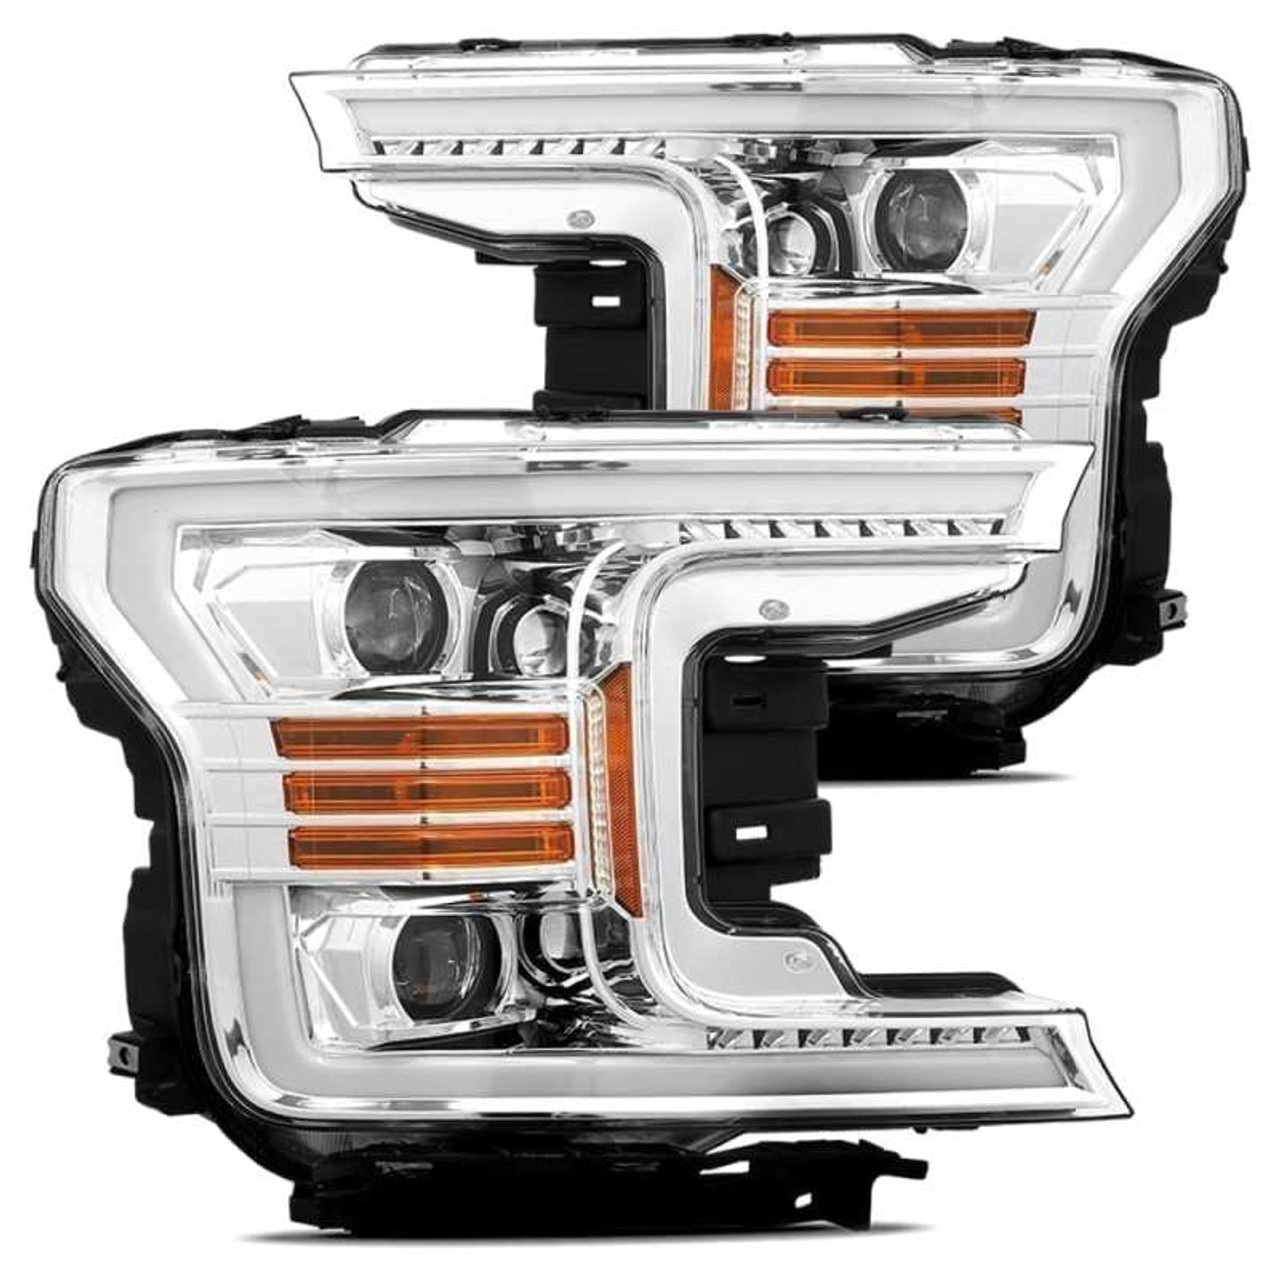 AlphaRex Luxx Series Chrome LED Projector Headlights 2018 to 2020 Ford F150 (880175)-Main View